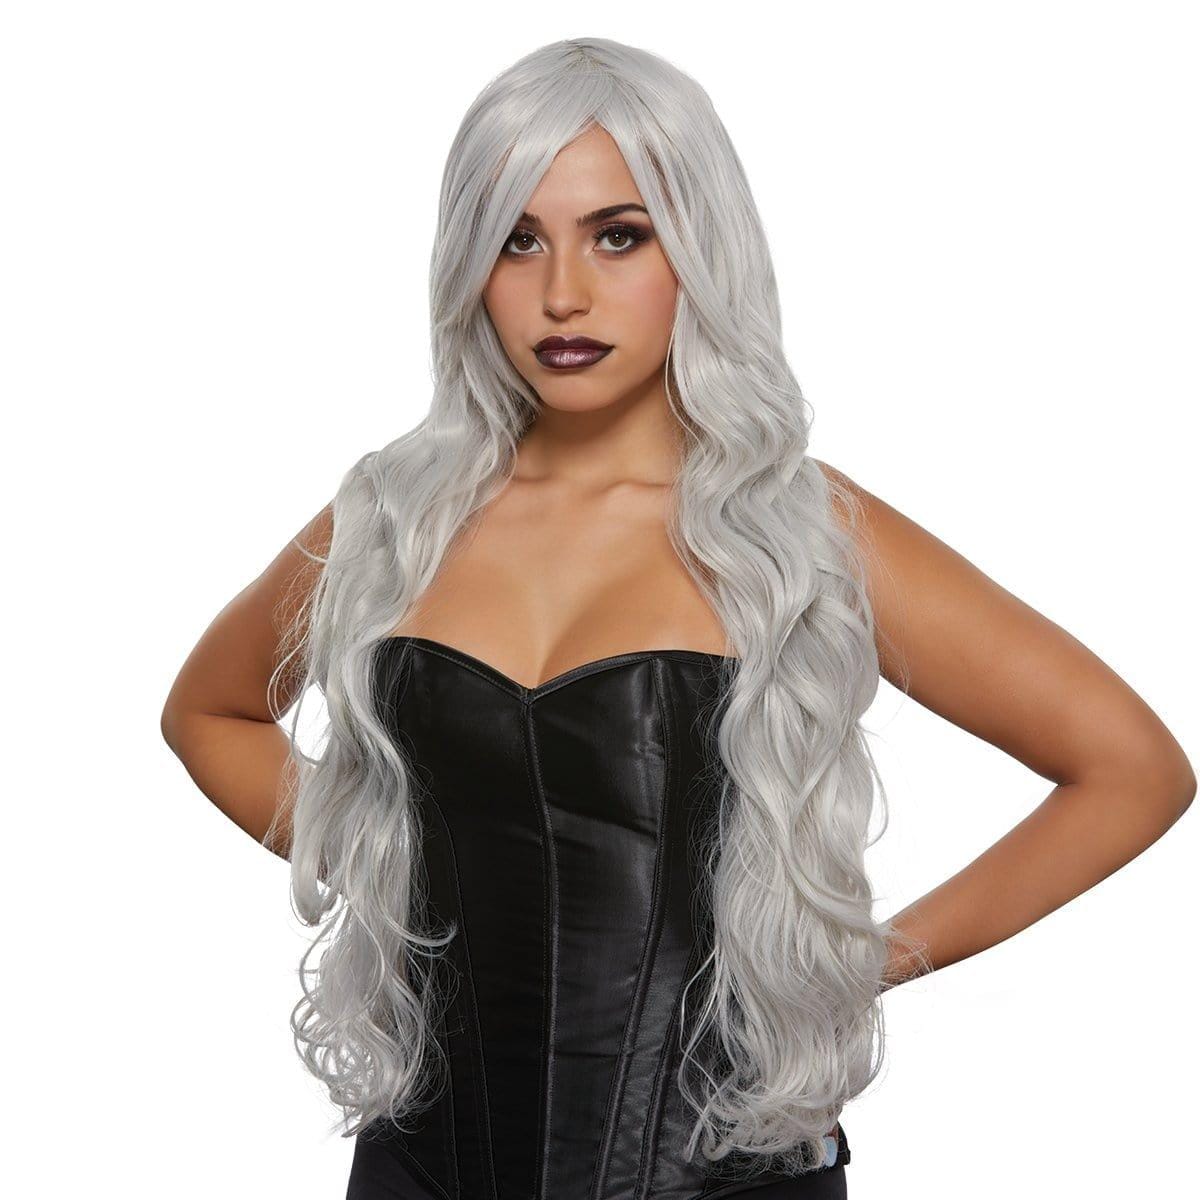 Buy Costume Accessories Smoky grey Diva wig for women sold at Party Expert